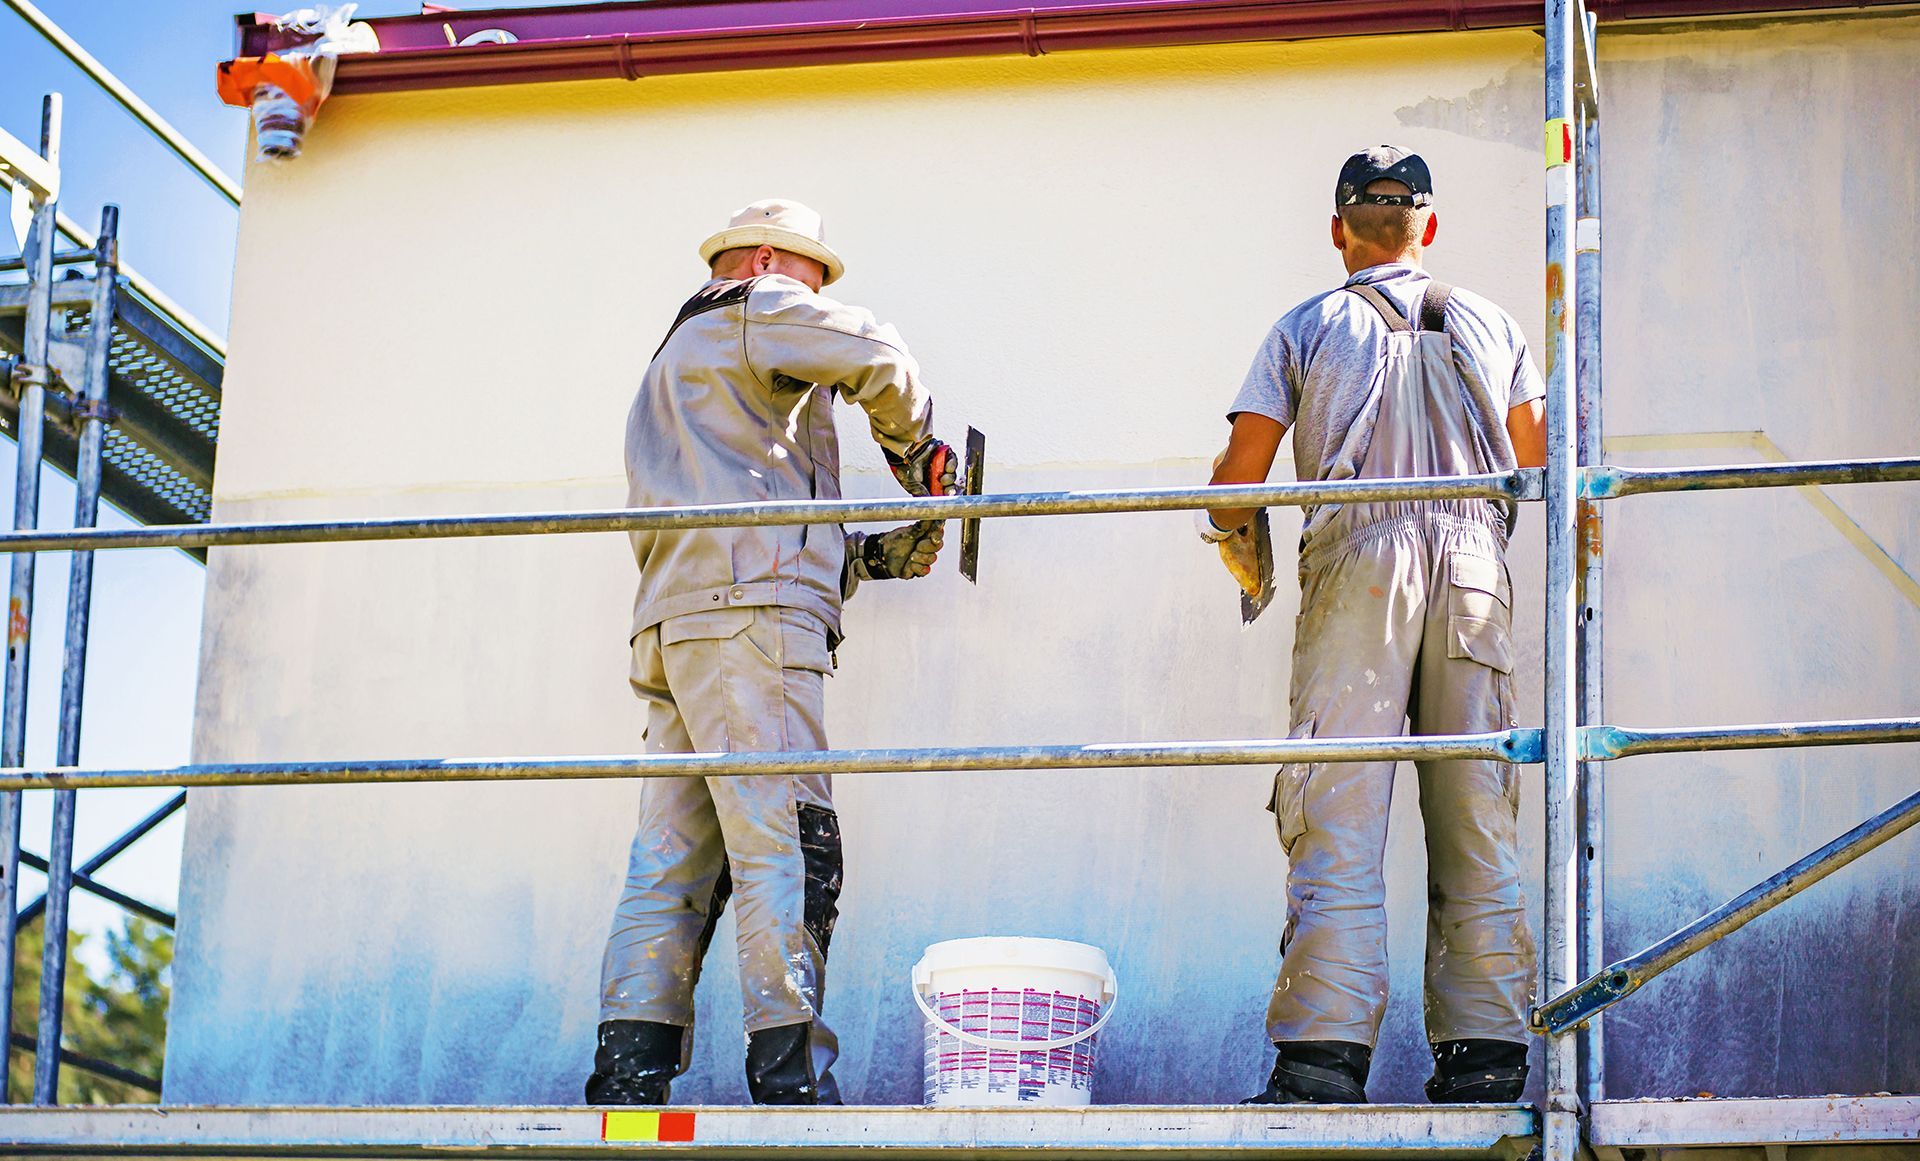 Two men are standing on a scaffolding painting a building.